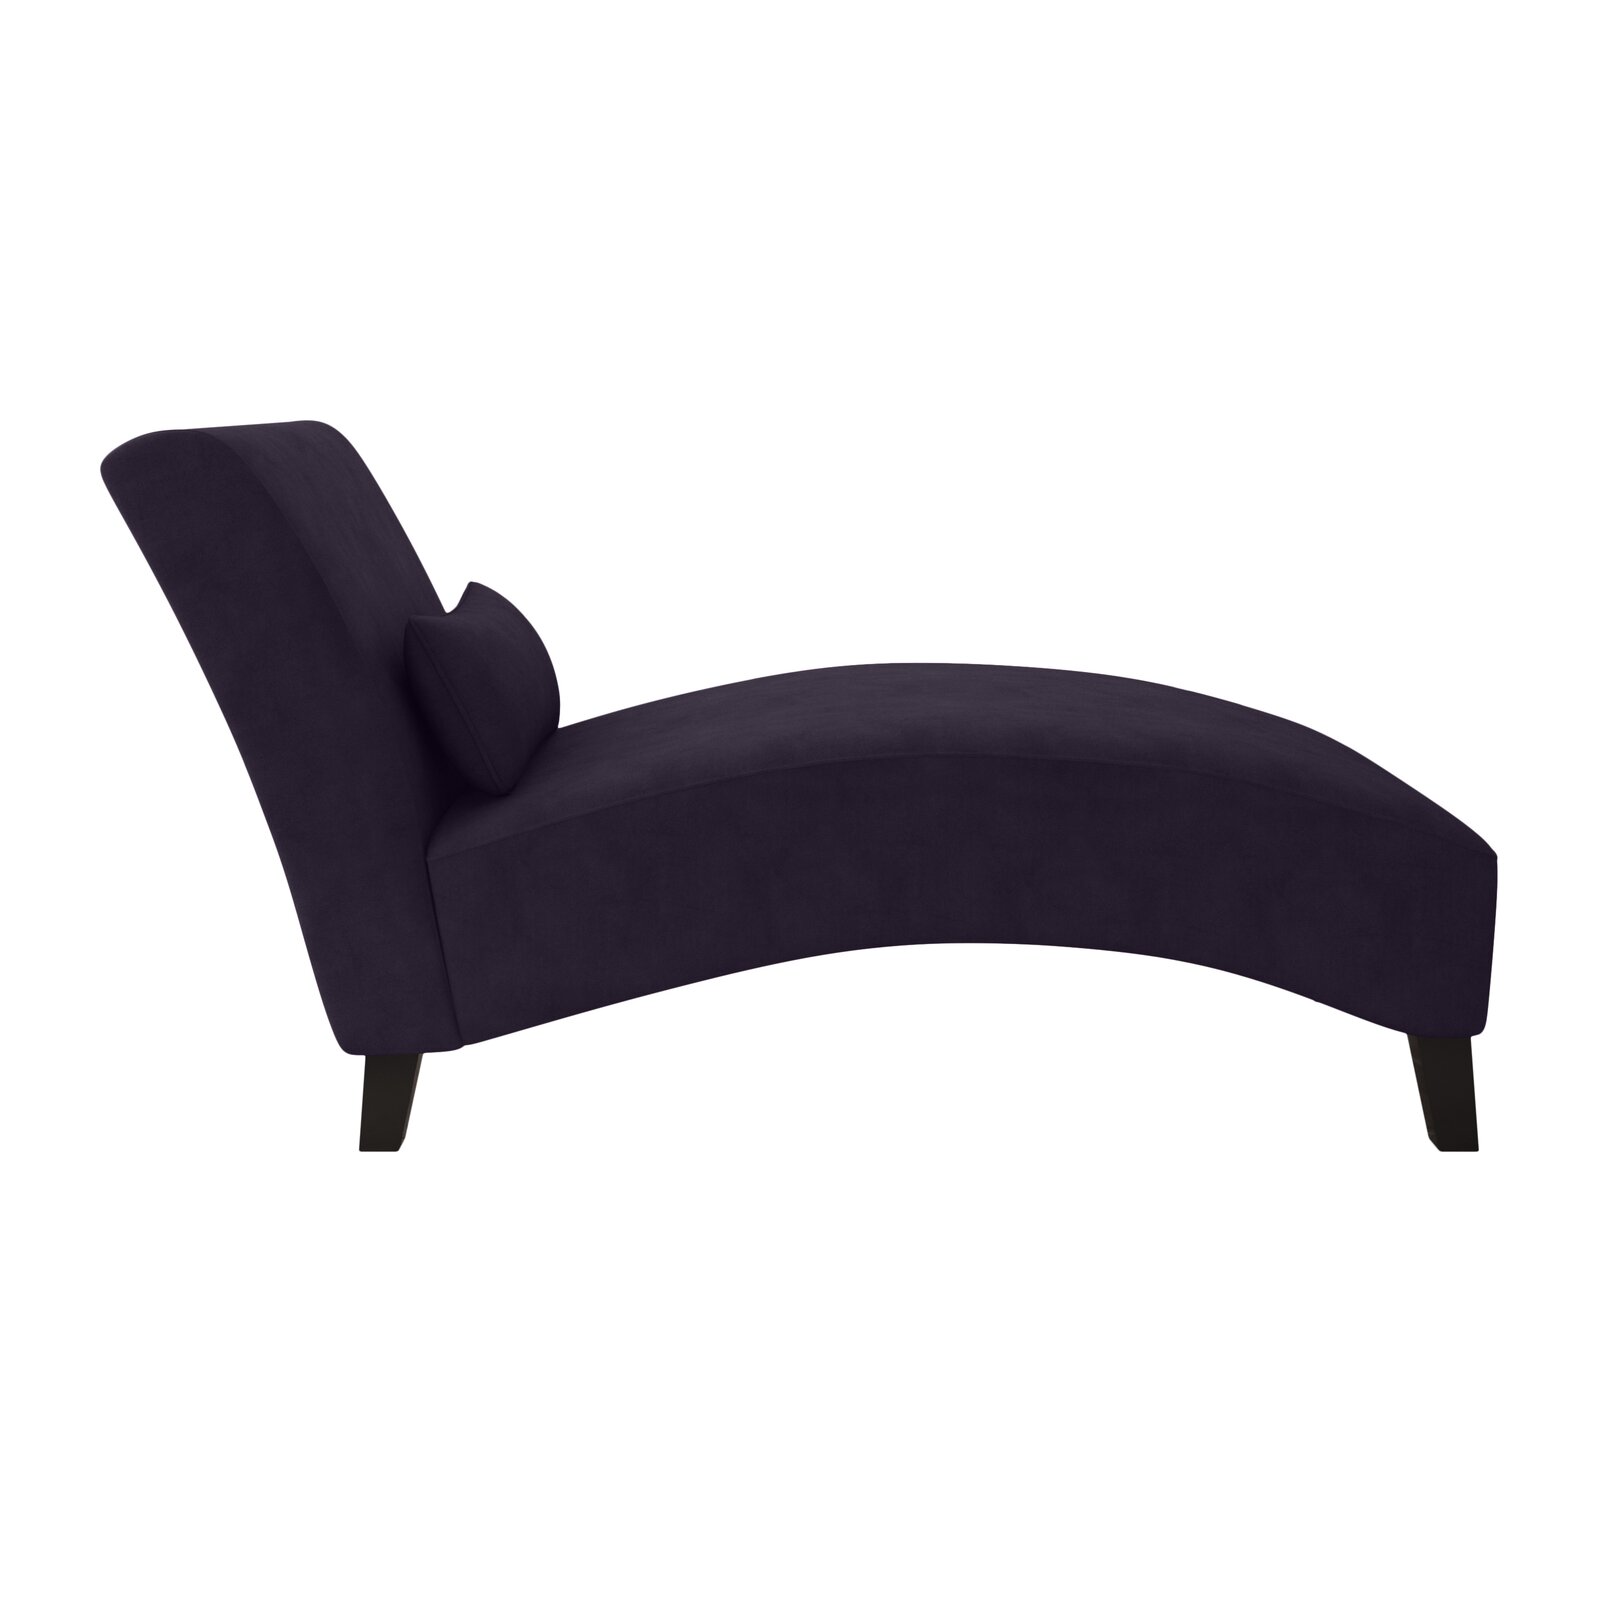 Braemar Armless Chaise Lounge, Weight Capacity: 300 lb., : 32.5'' H x 26.75'' W x 61'' L - image 2 of 5